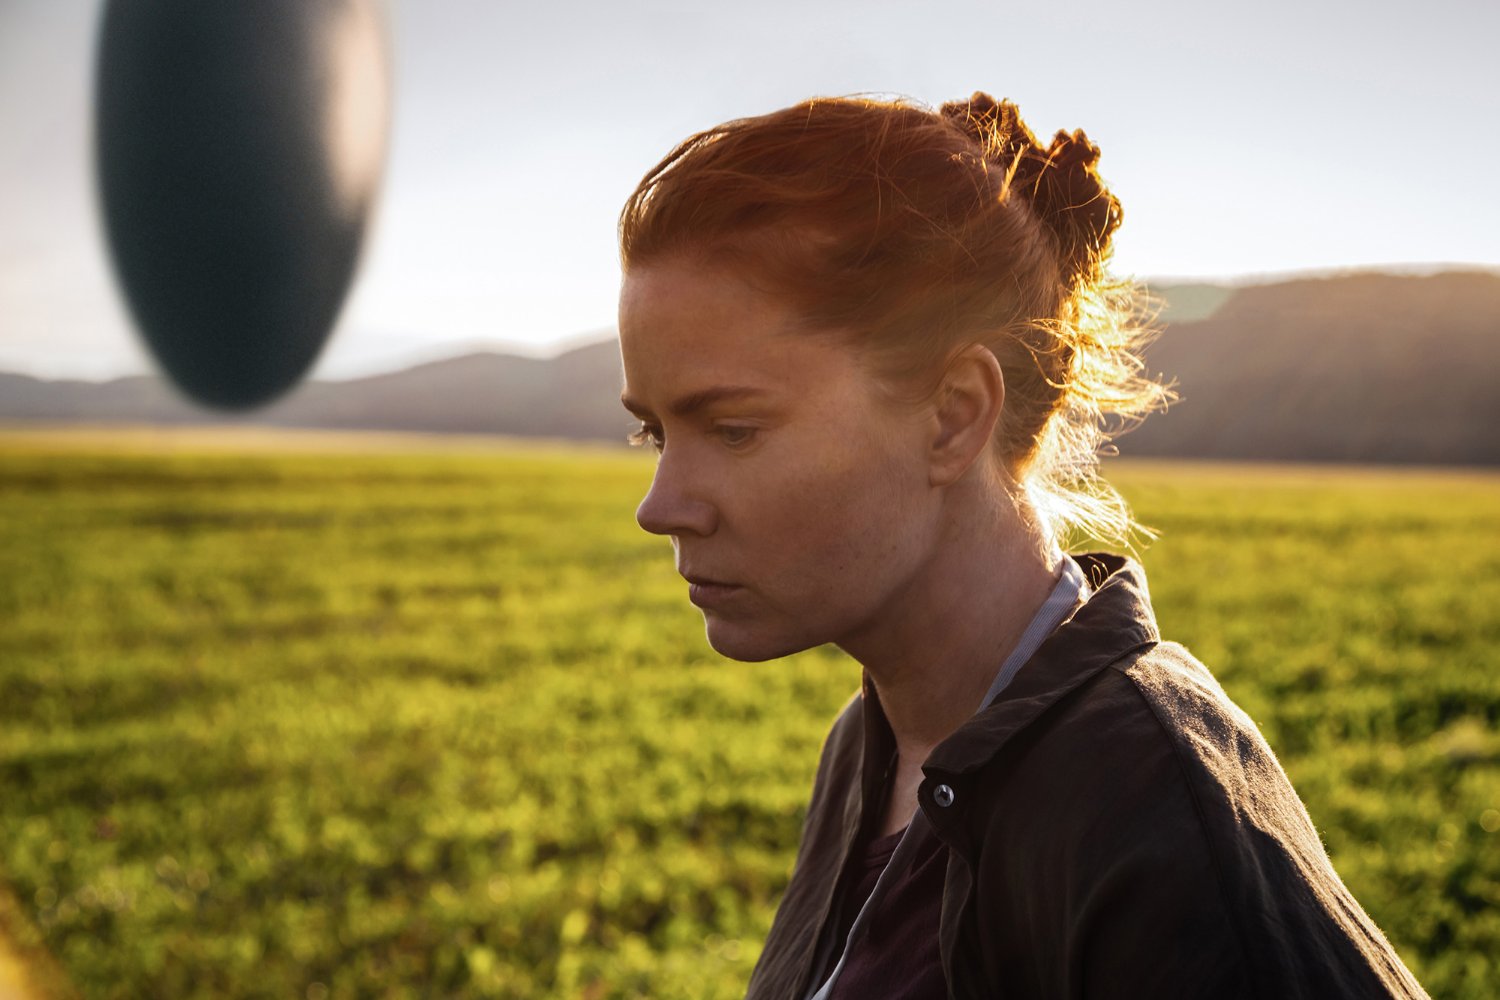 ARRIVAL Packs An Emotional Wallop